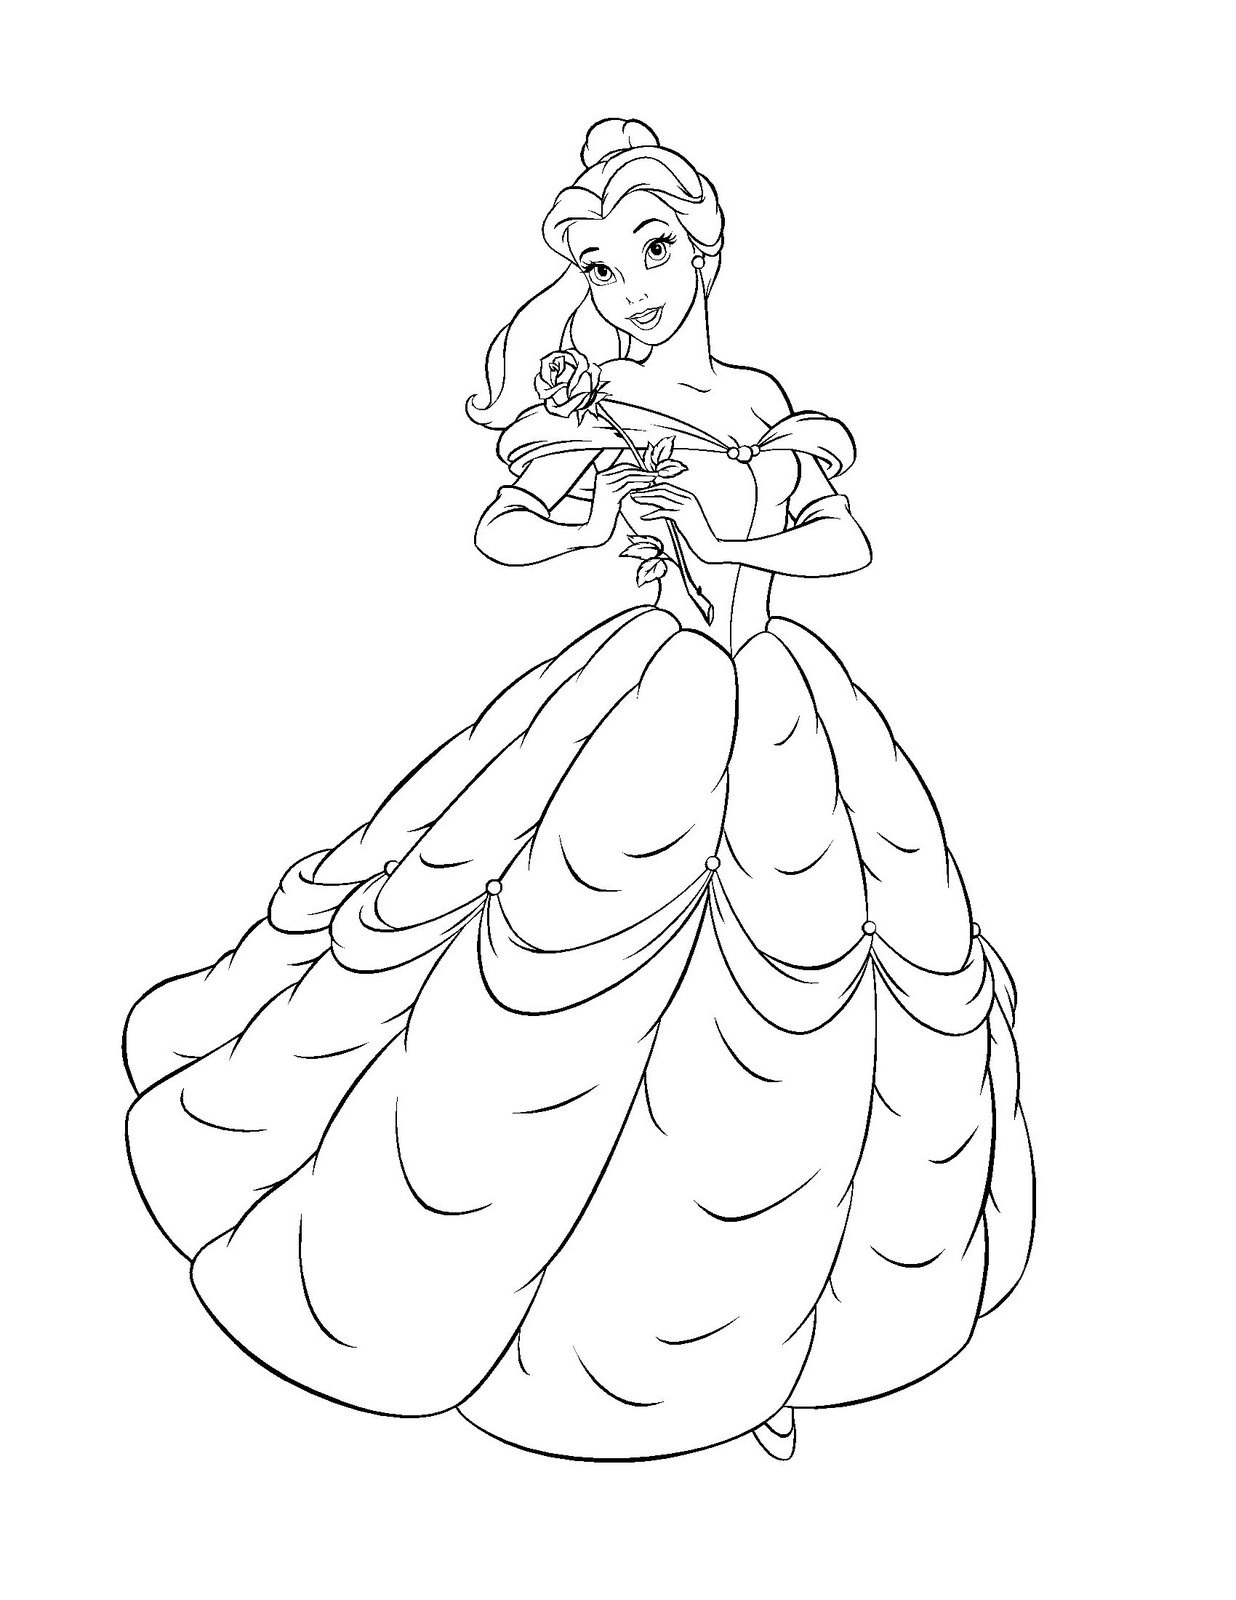 disney-princess-coloring-pages-belle-at-getcolorings-free-printable-colorings-pages-to